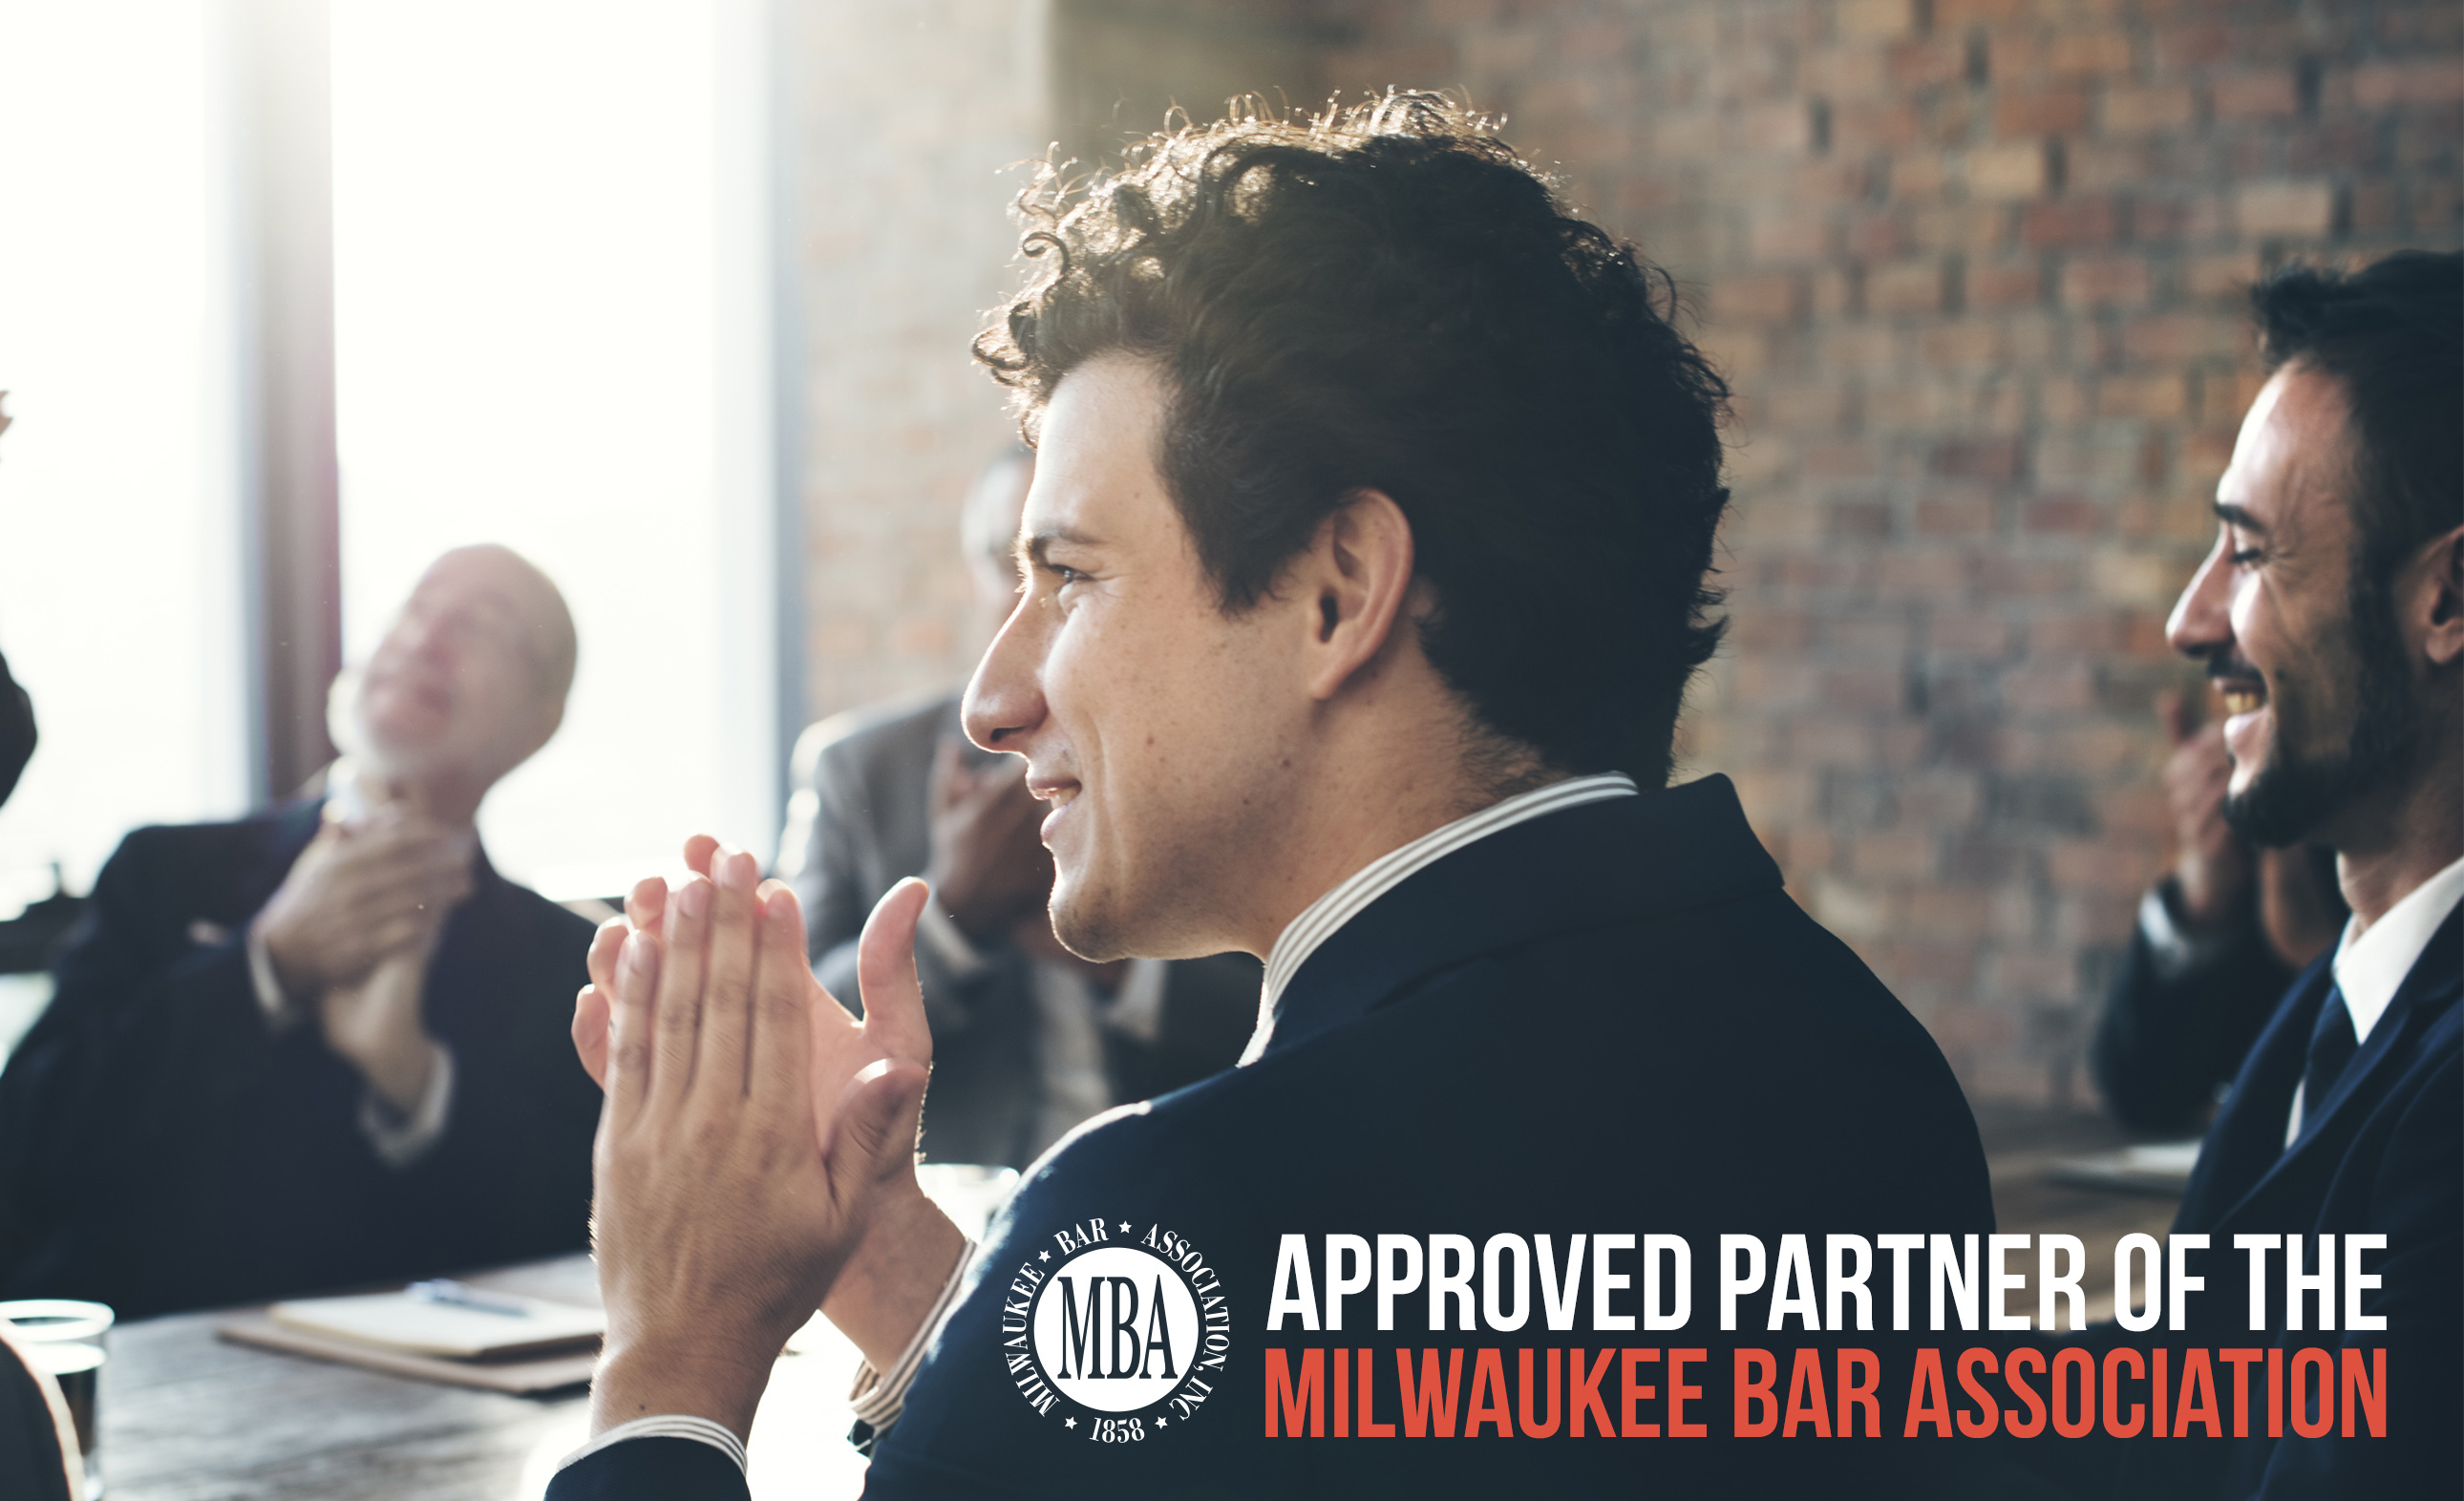 ALPS is an Approved Partner of the Milwaukee Bar Association